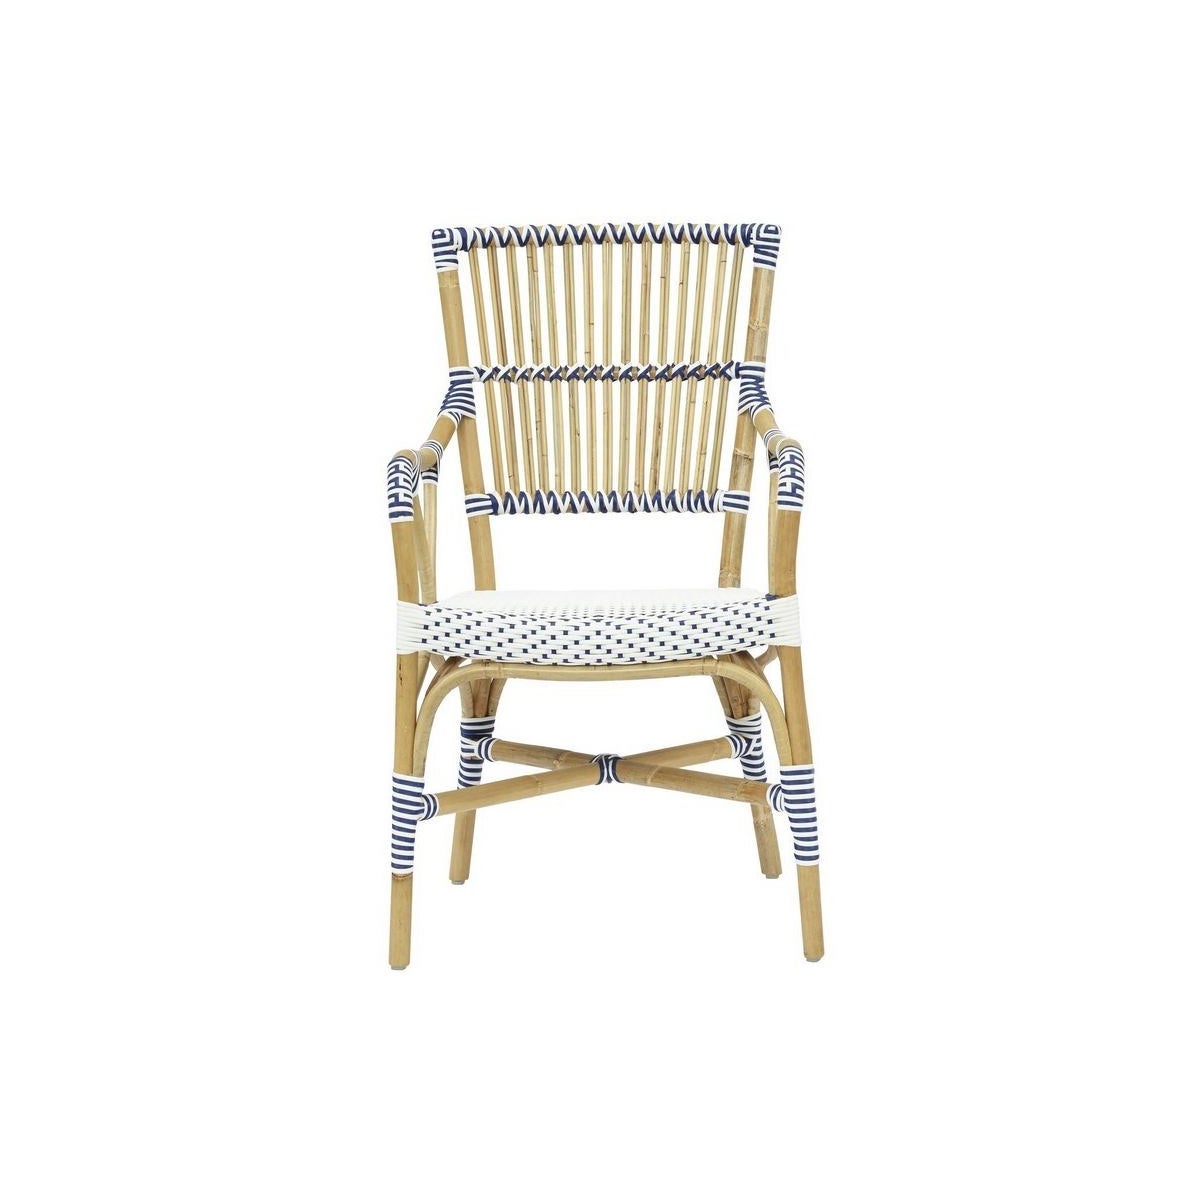 Madrid Arm Chair Frame Color - Natural   Woven Seat and Back  Color - White/Navy   This Item Wi